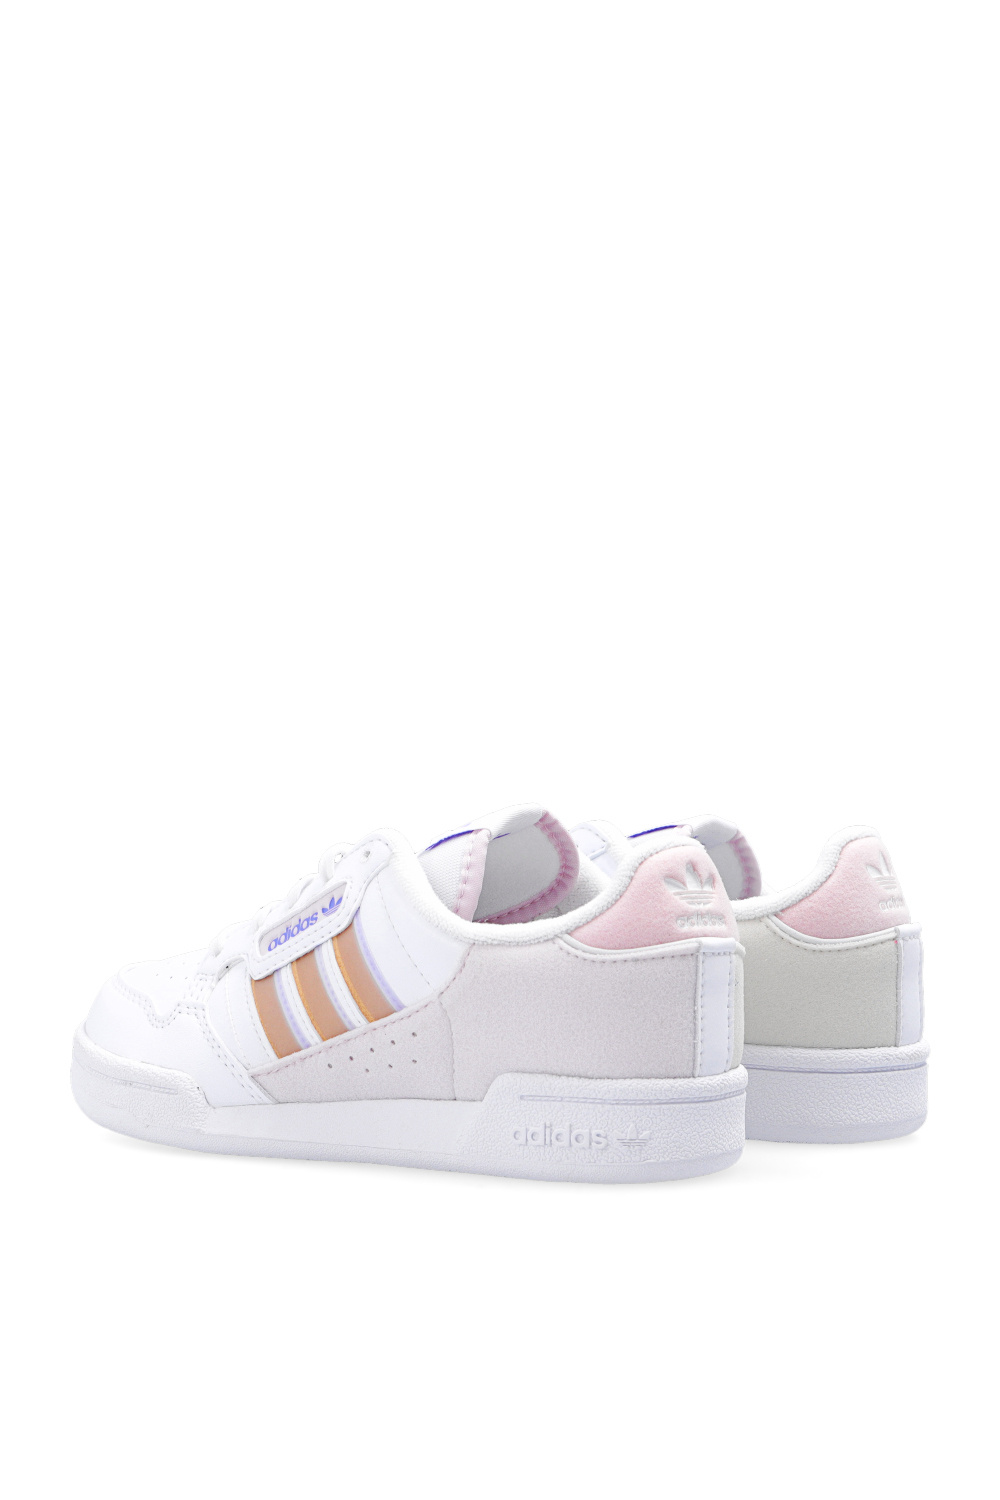 adidas jeremy Kids ‘Continental 80 Stripes C’ sneakers